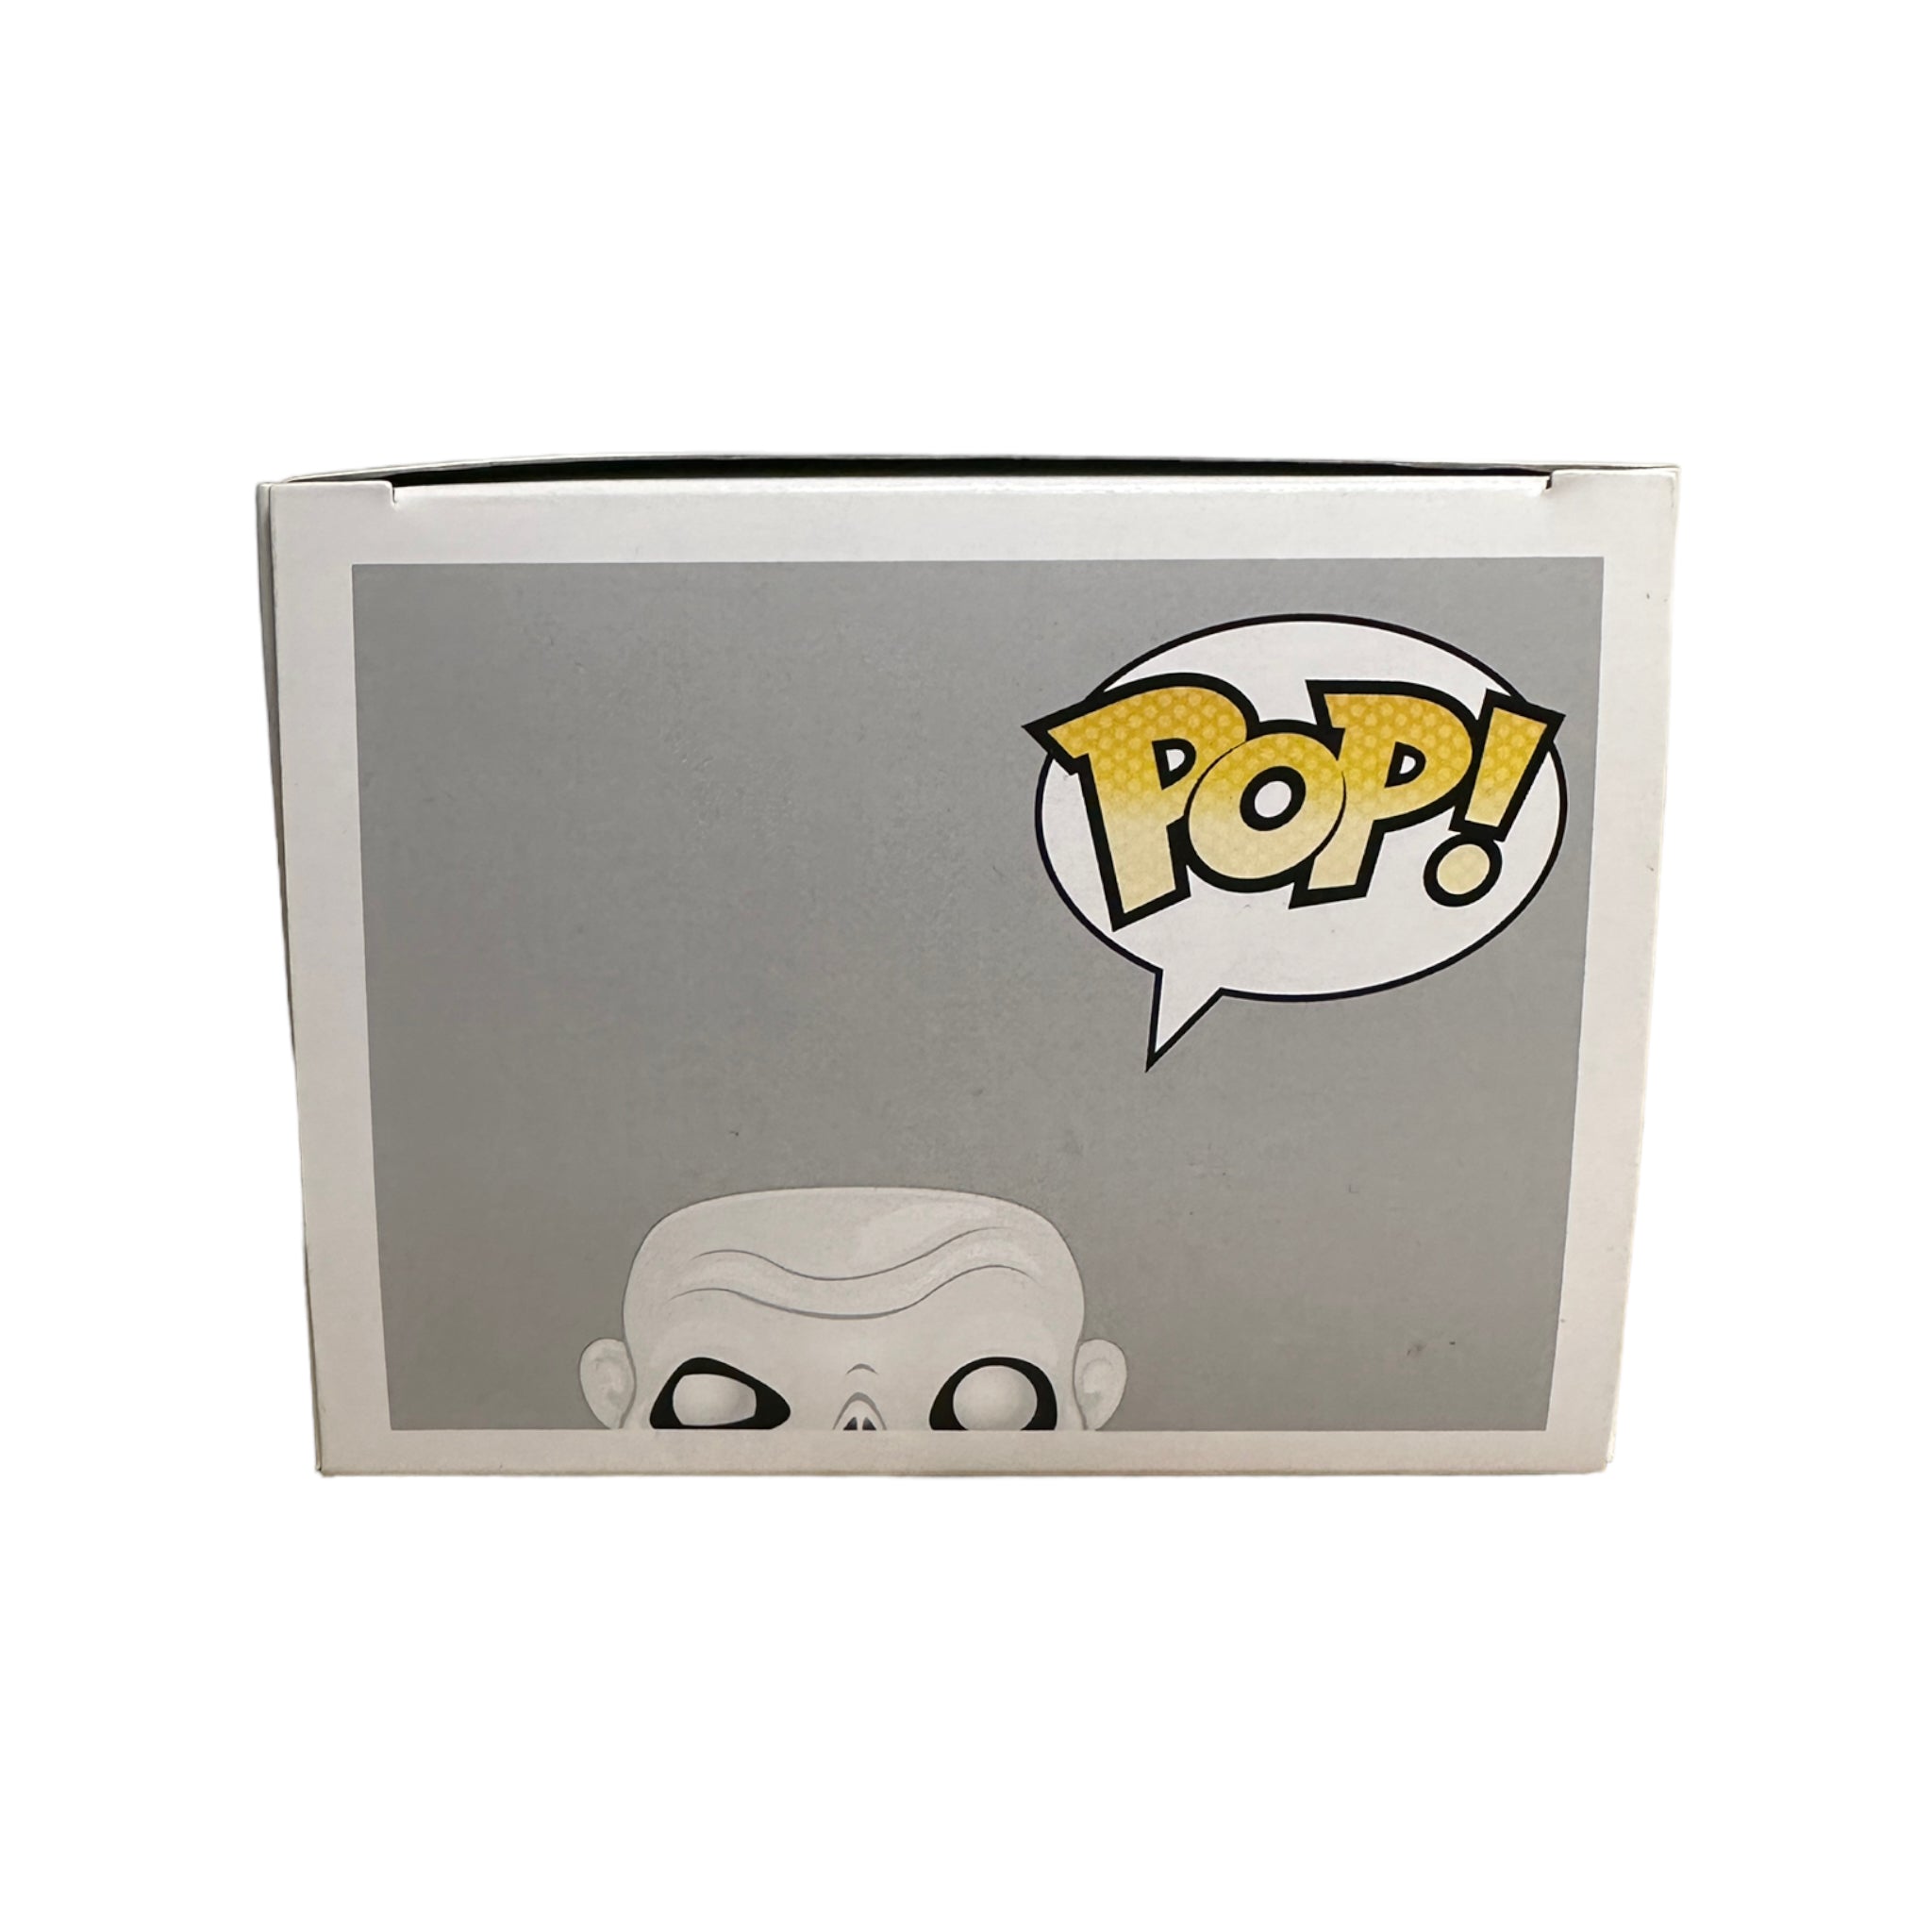 Ezra #163 (Glows in the Dark) Funko Pop! - The Haunted Mansion - SDCC 2016 Exclusive LE1000 Pcs - Condition 7.5/10